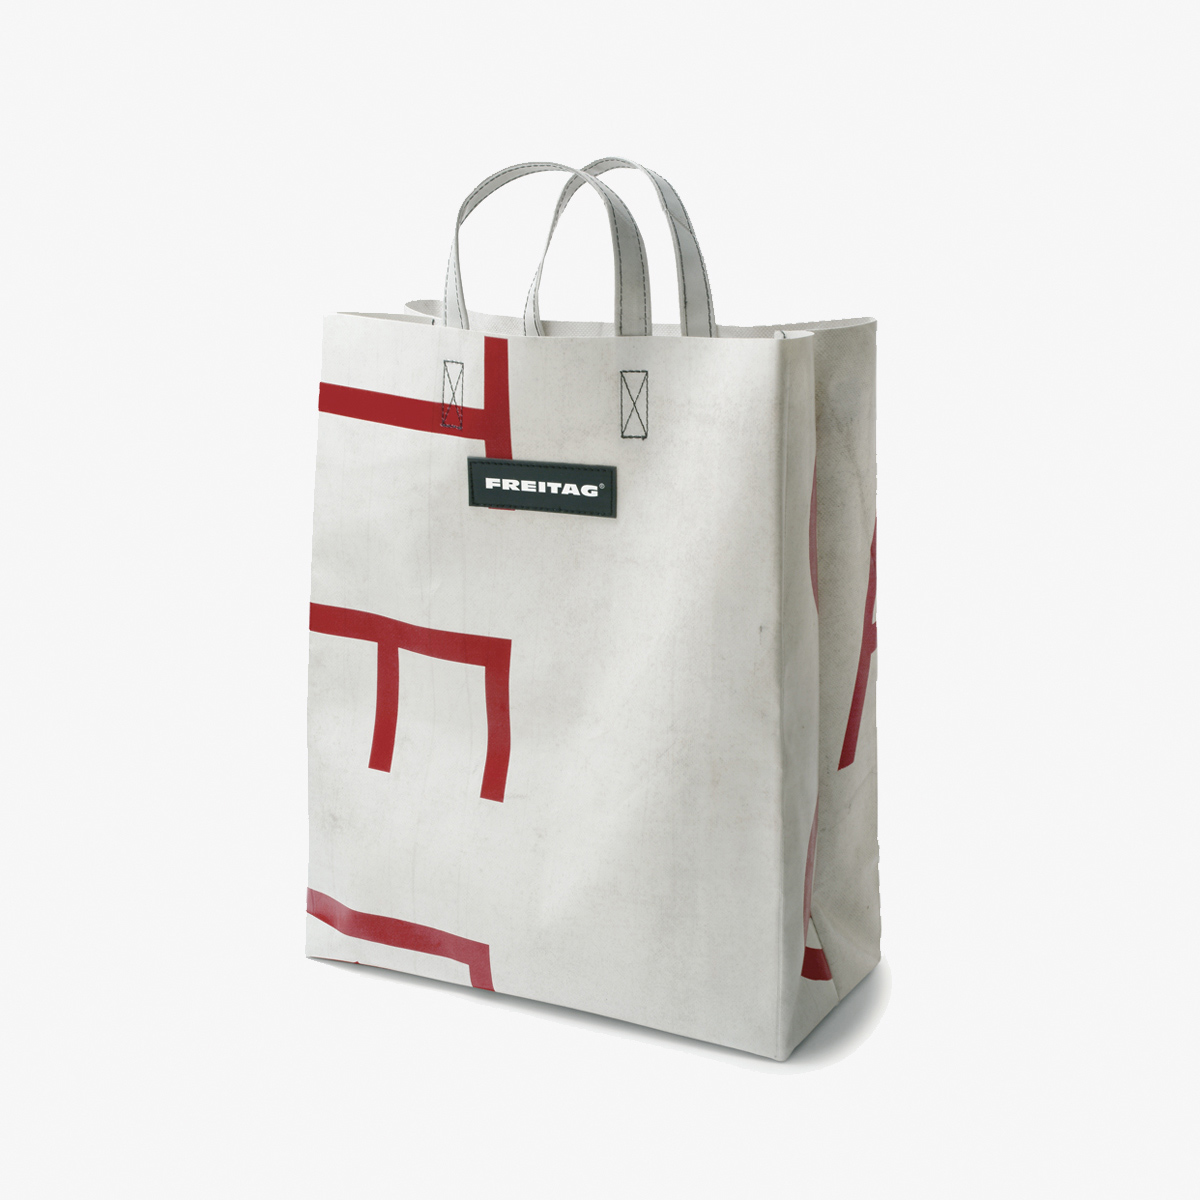 FREITAG :: F52 MIAMI VICE :: A simple super-functional shopping